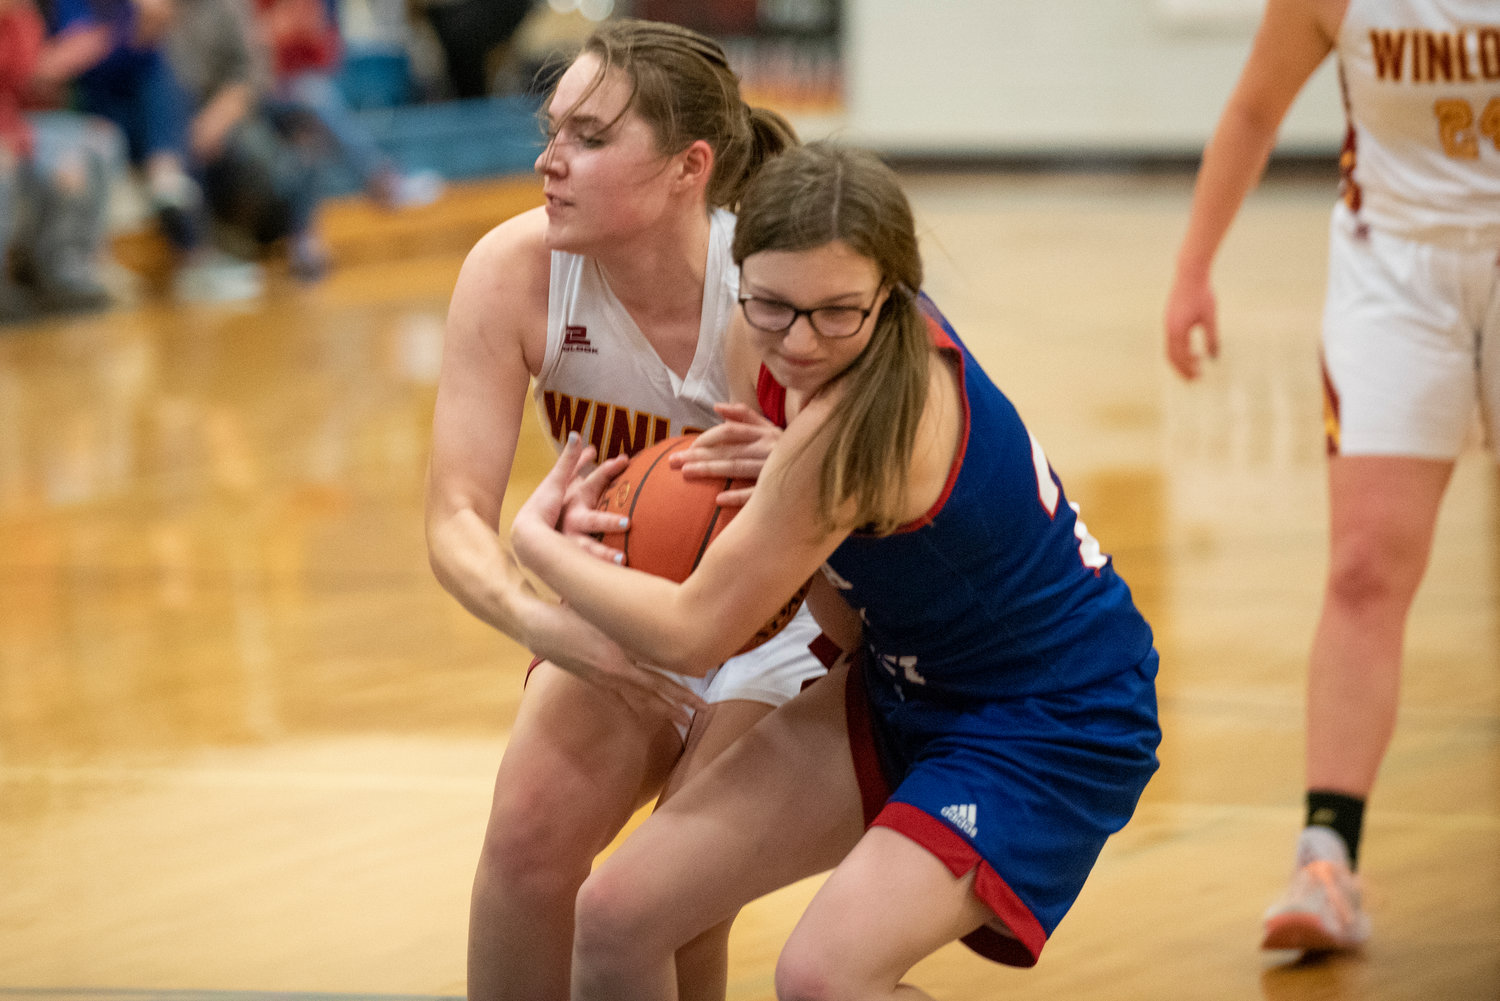 Winlock's Madison Vigre fights for a loose ball with a Willapa Valley player on Jan. 21.